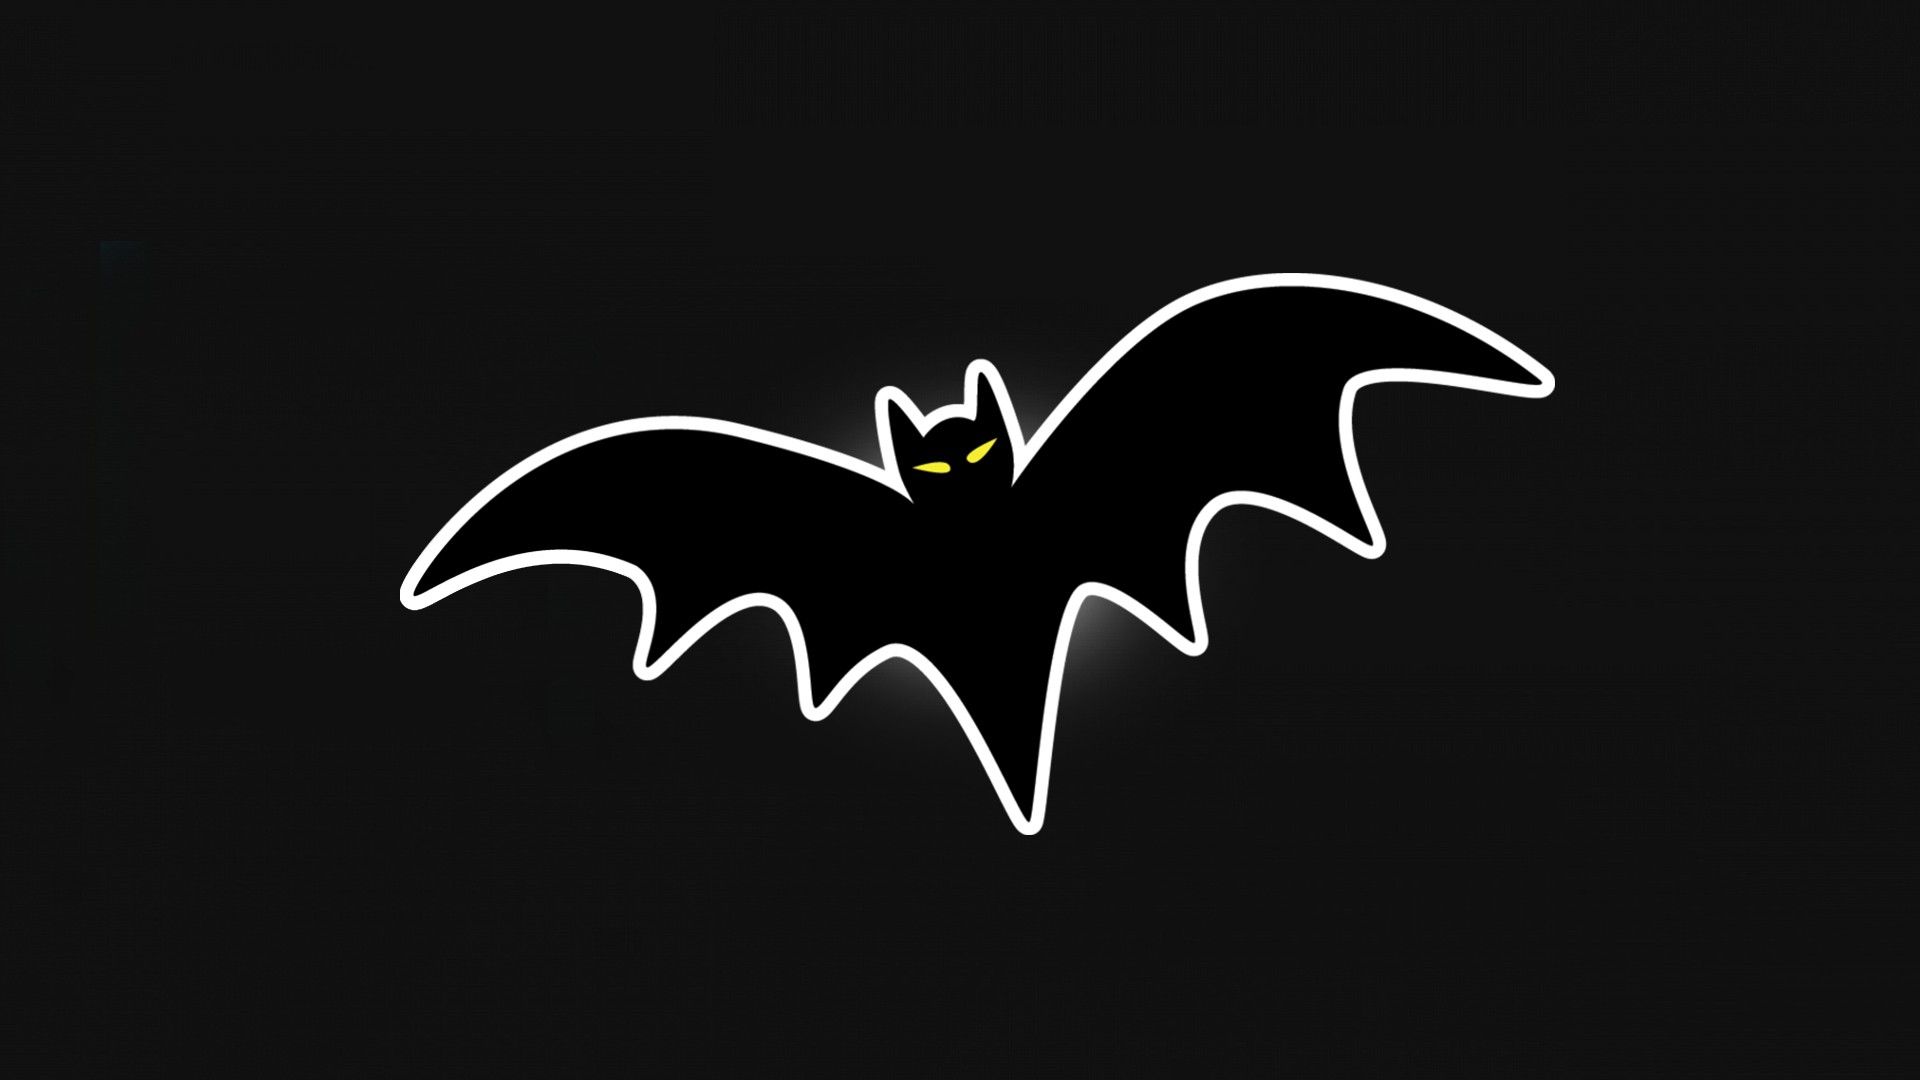 Seamless wallpaper with bats for halloween Vector Image